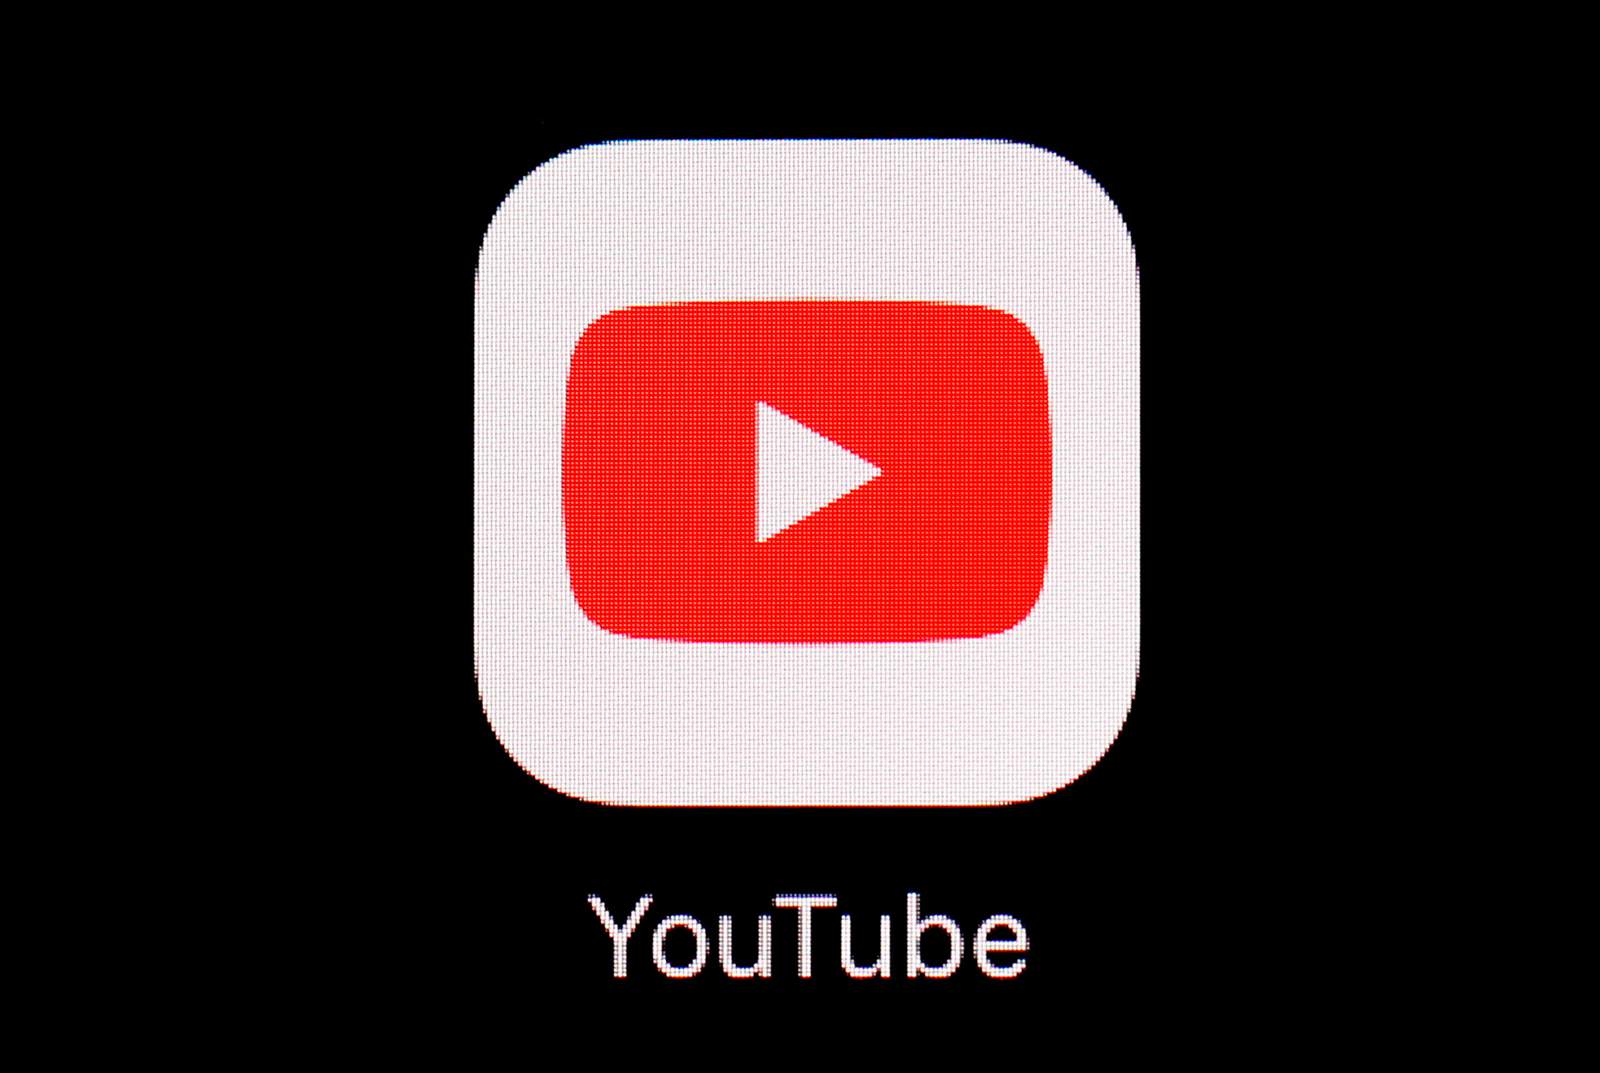 Weeks after election, YouTube cracks down on misinformation